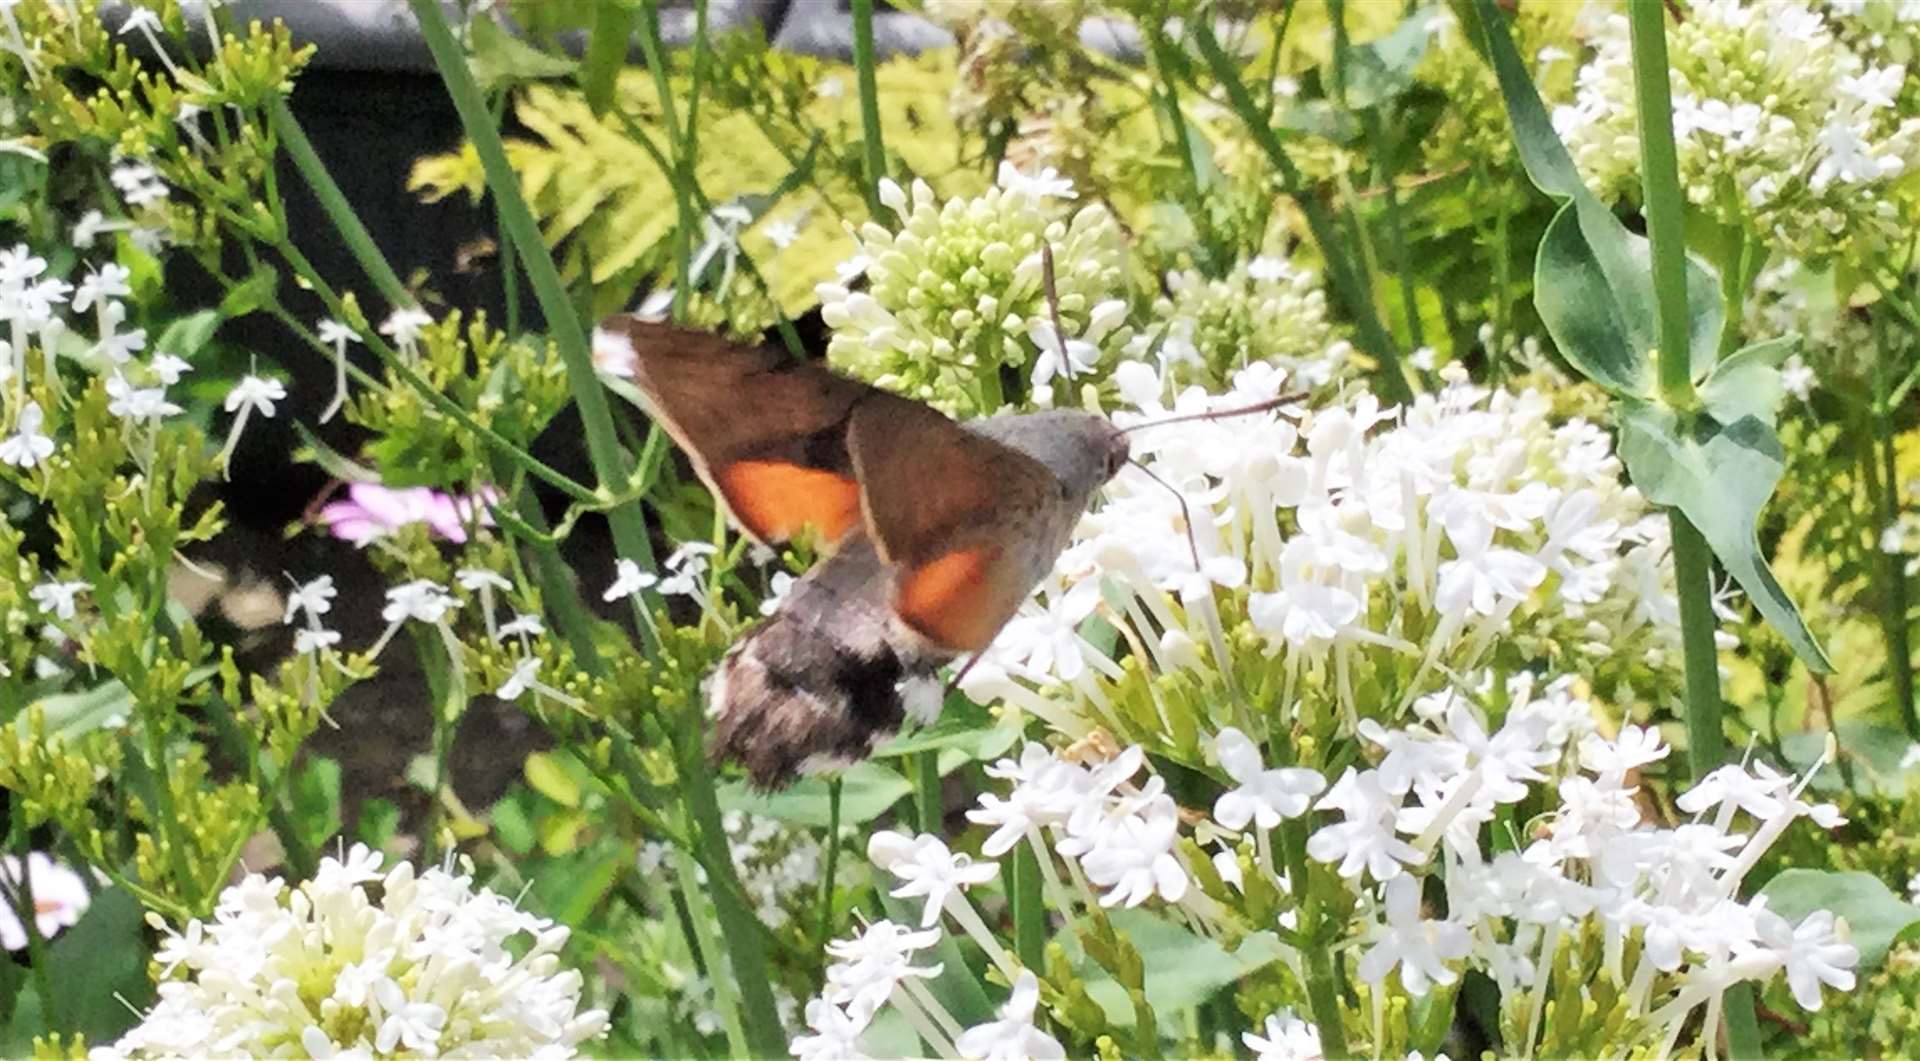 The moth was seen feeding from plants in the garden. Picture: Steven Buttress